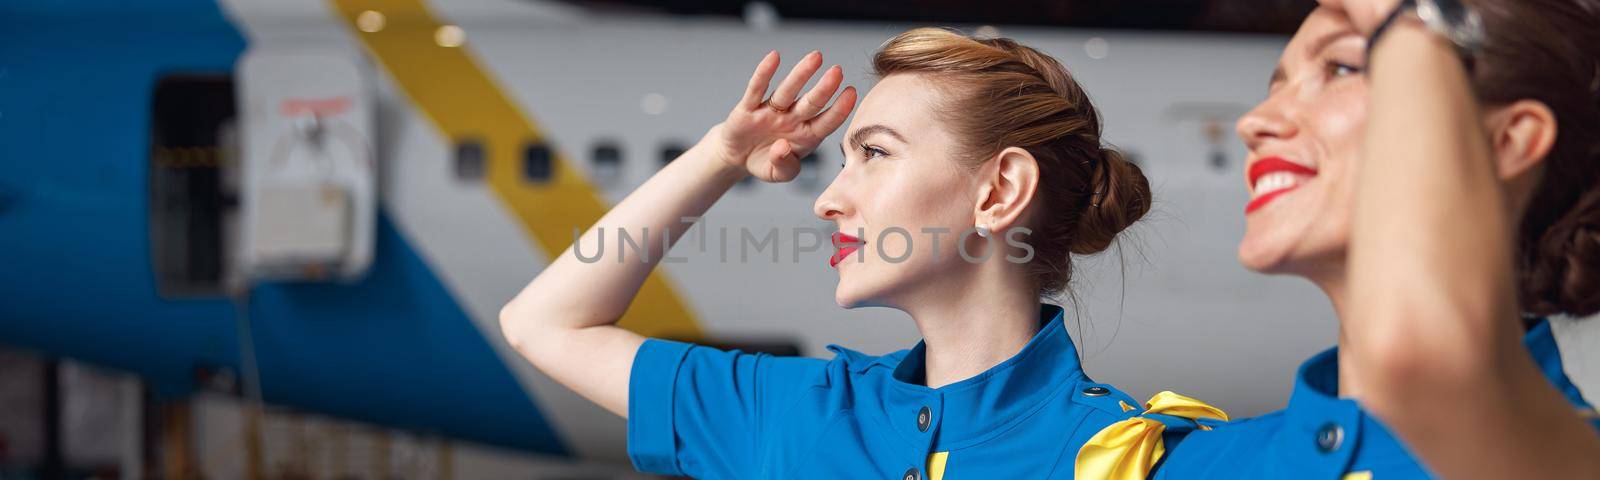 Portrait of two beautiful air stewardesses in stylish blue uniform smiling while looking up in the sky, standing together in front of passenger aircraft in hangar at the airport. Occupation concept